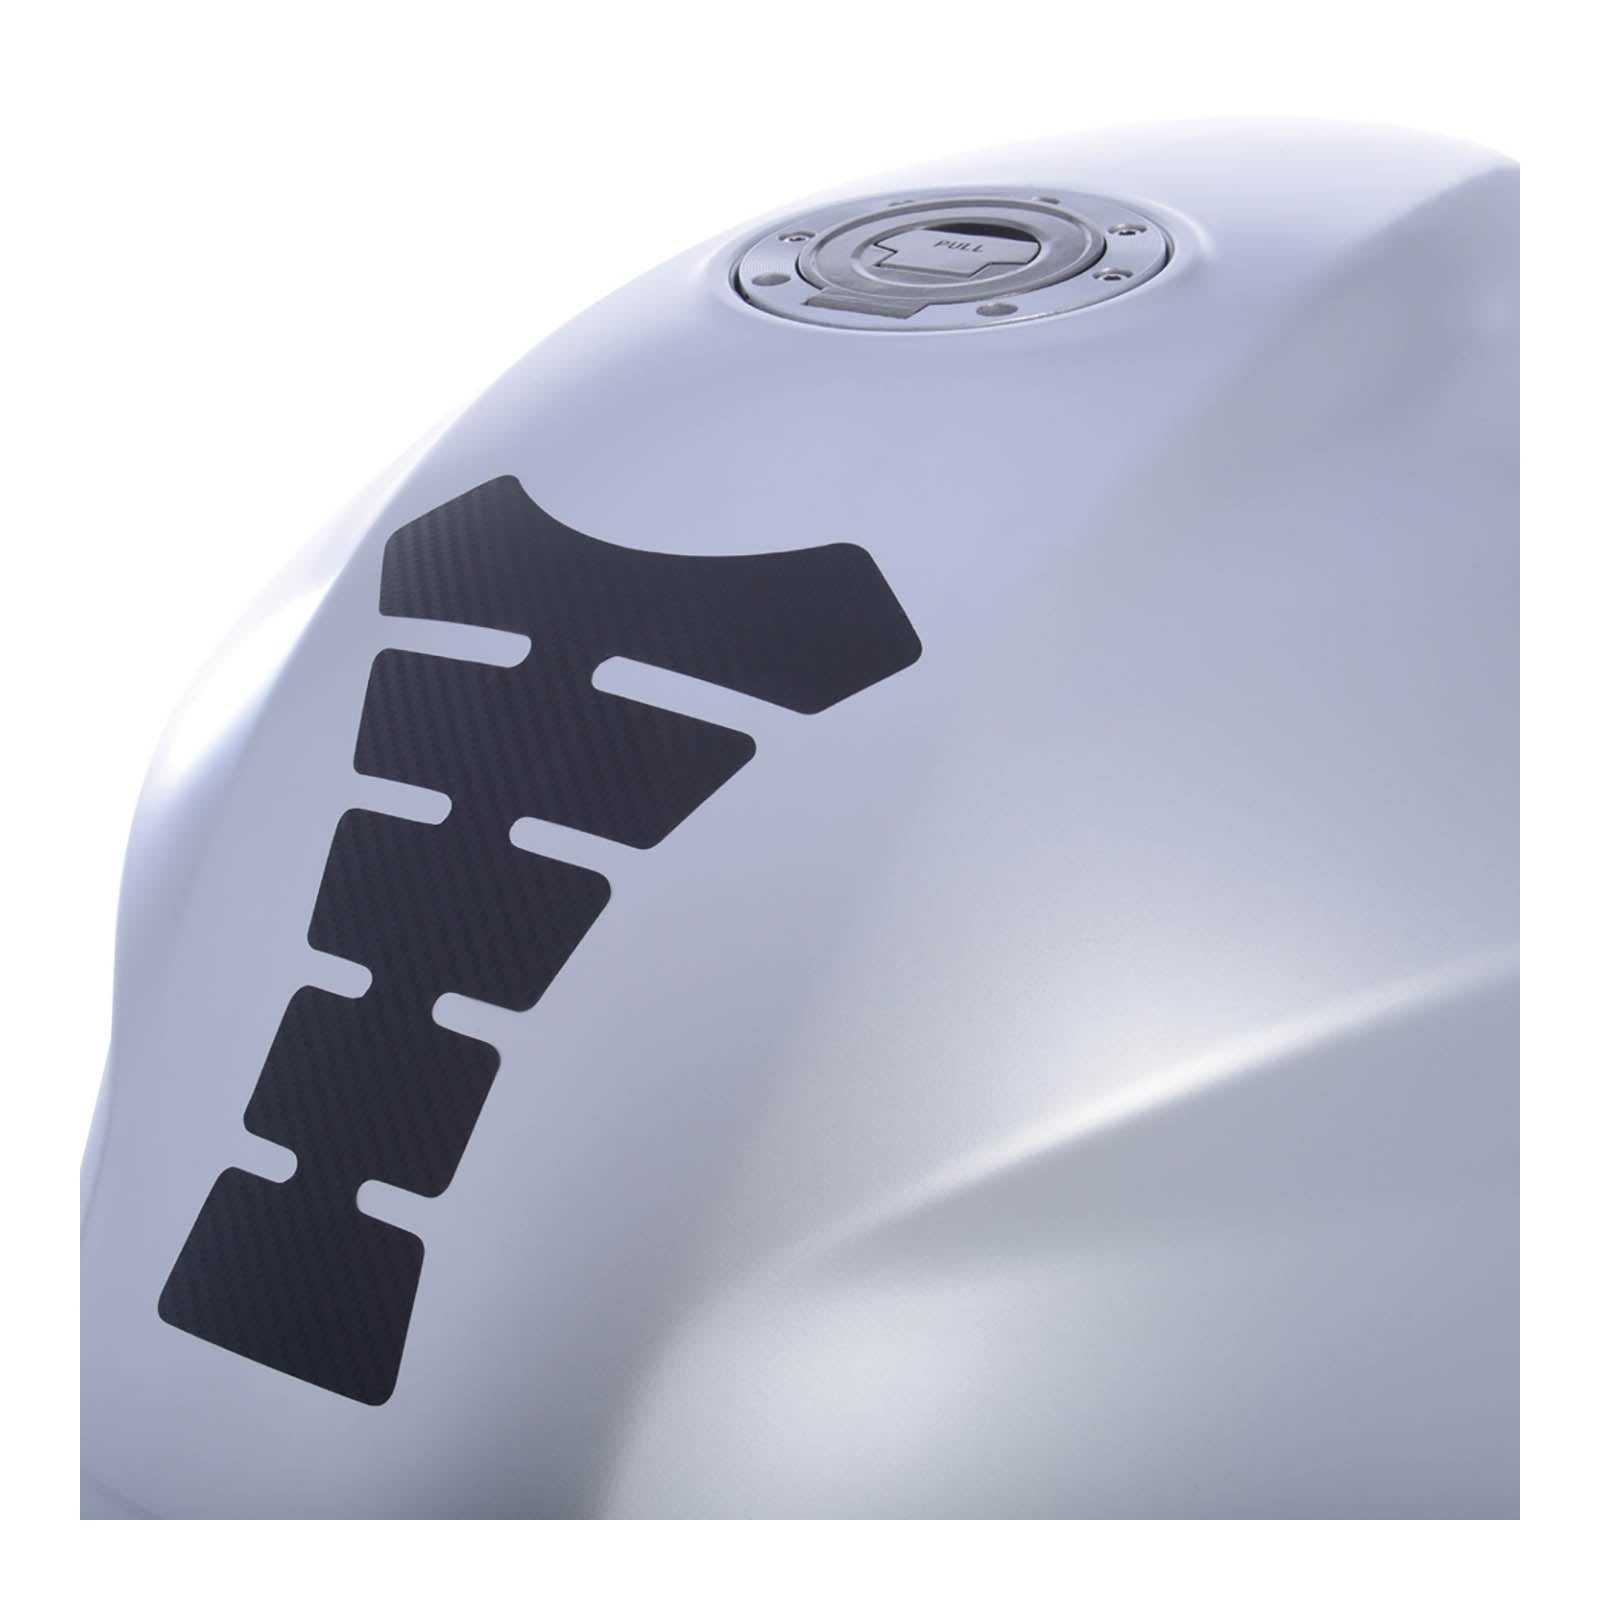 Oxford, OXFORD EMBOSSED CARBON ORIGINAL TANK PROTECTOR